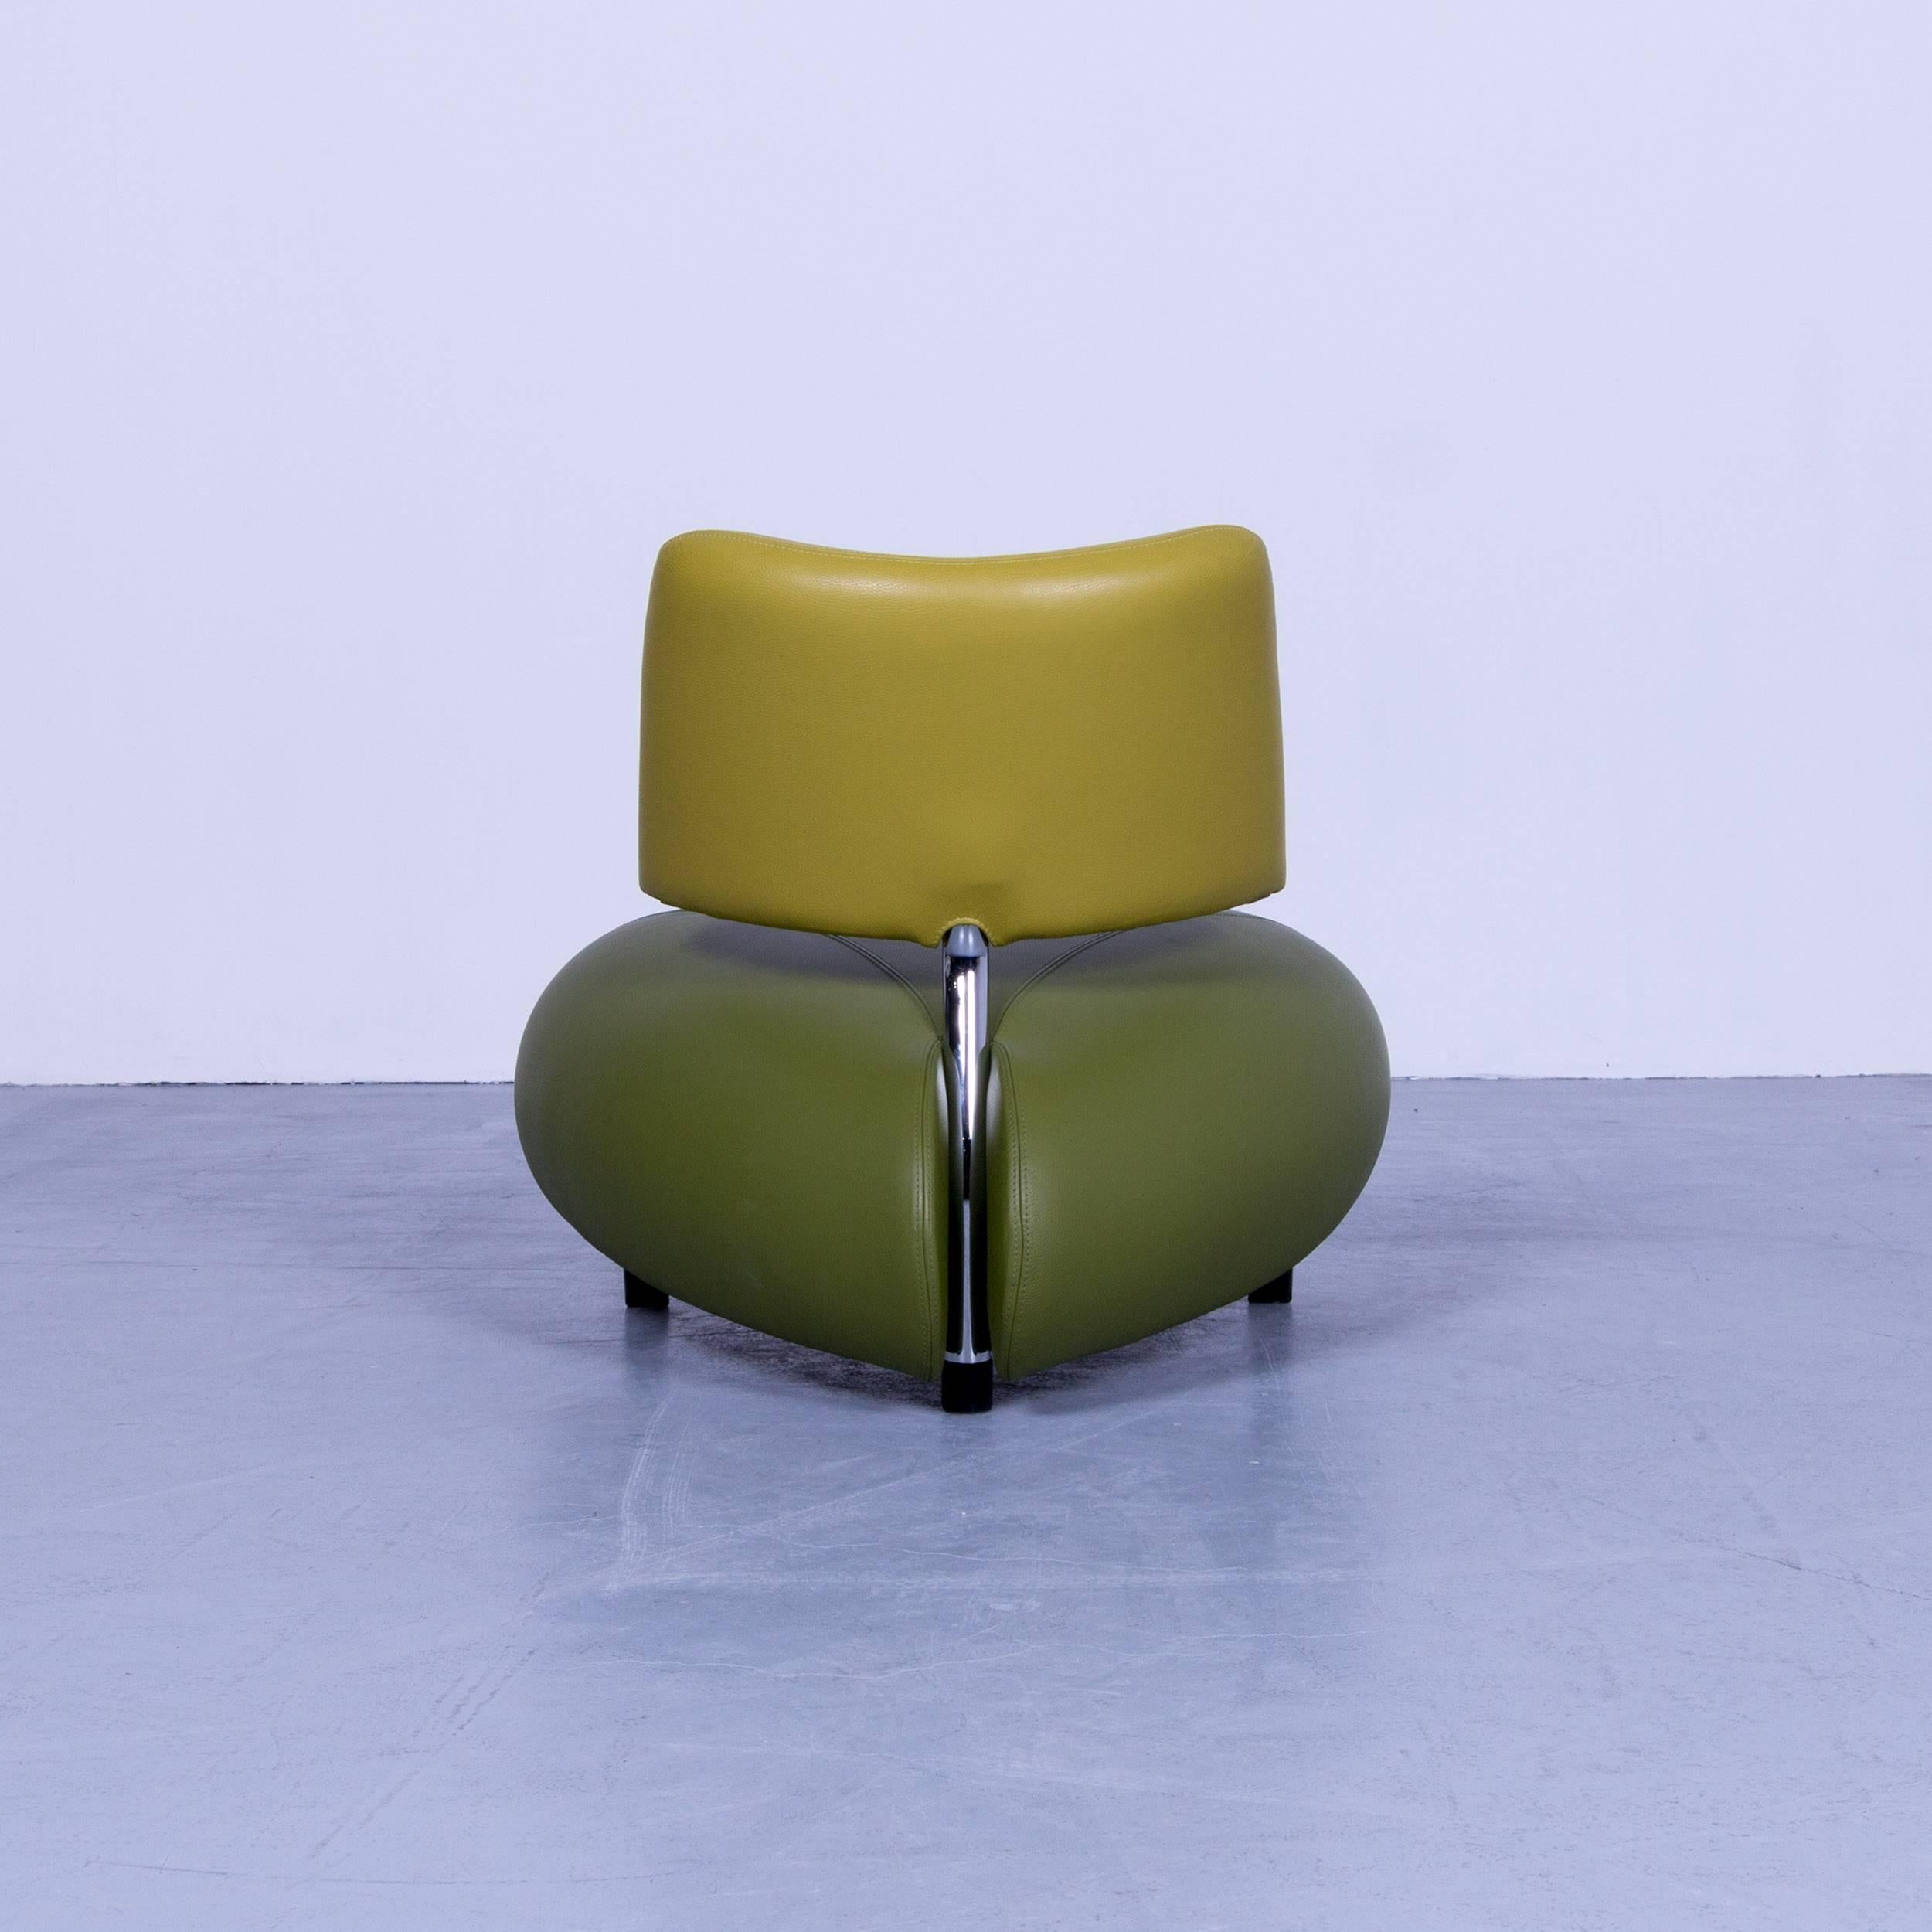 Leather Leolux Pallone Pa Designer Chair Green One Seat Modern by Roy De Scheemaker 1989 For Sale